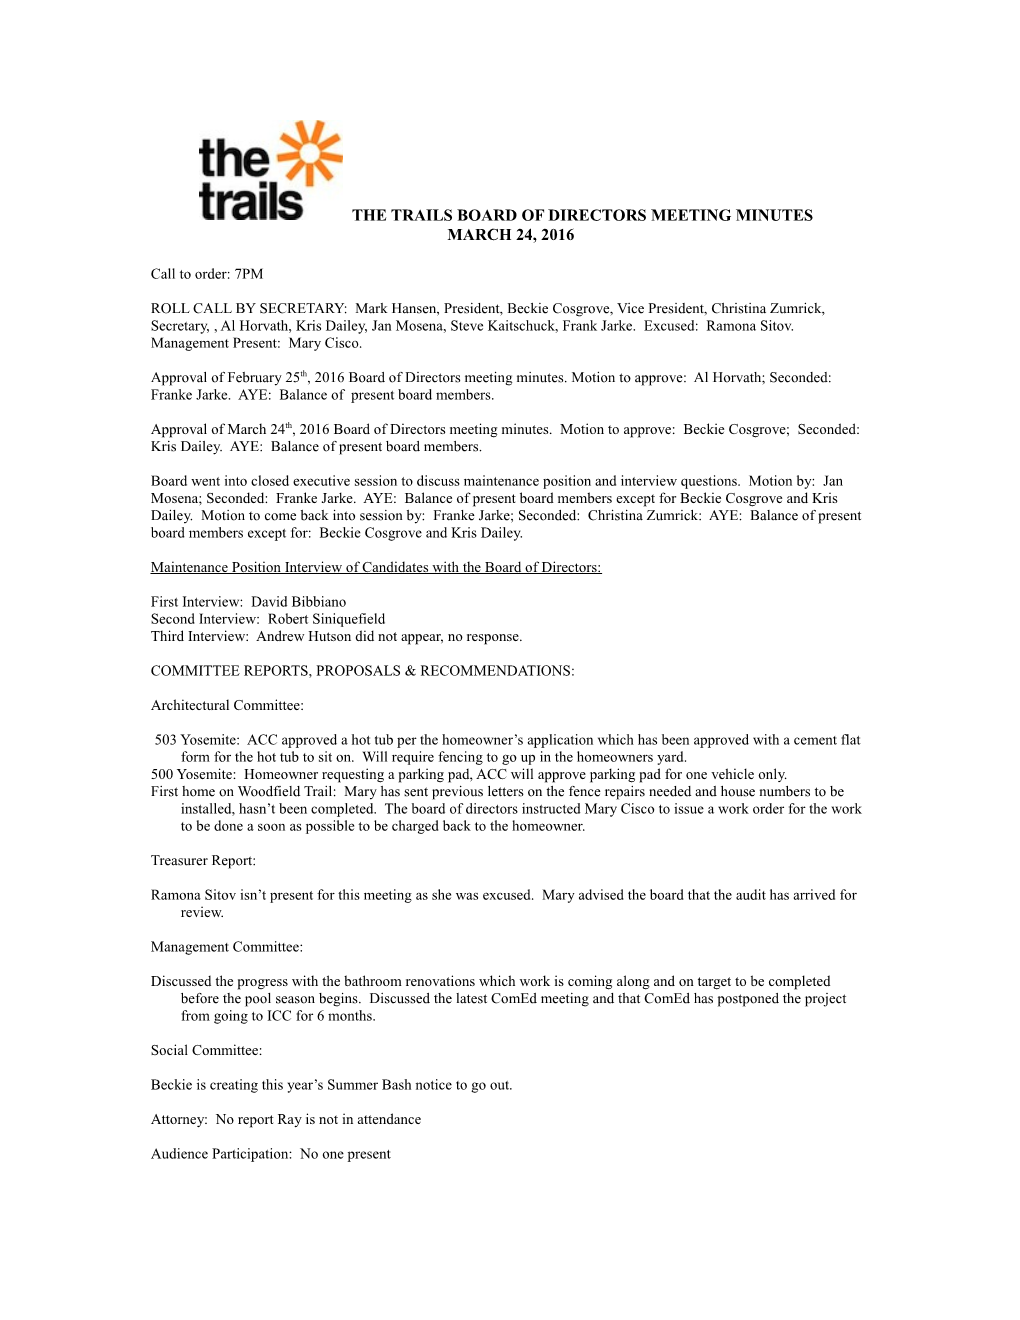 The Trails Board of Directors Meeting Minutes